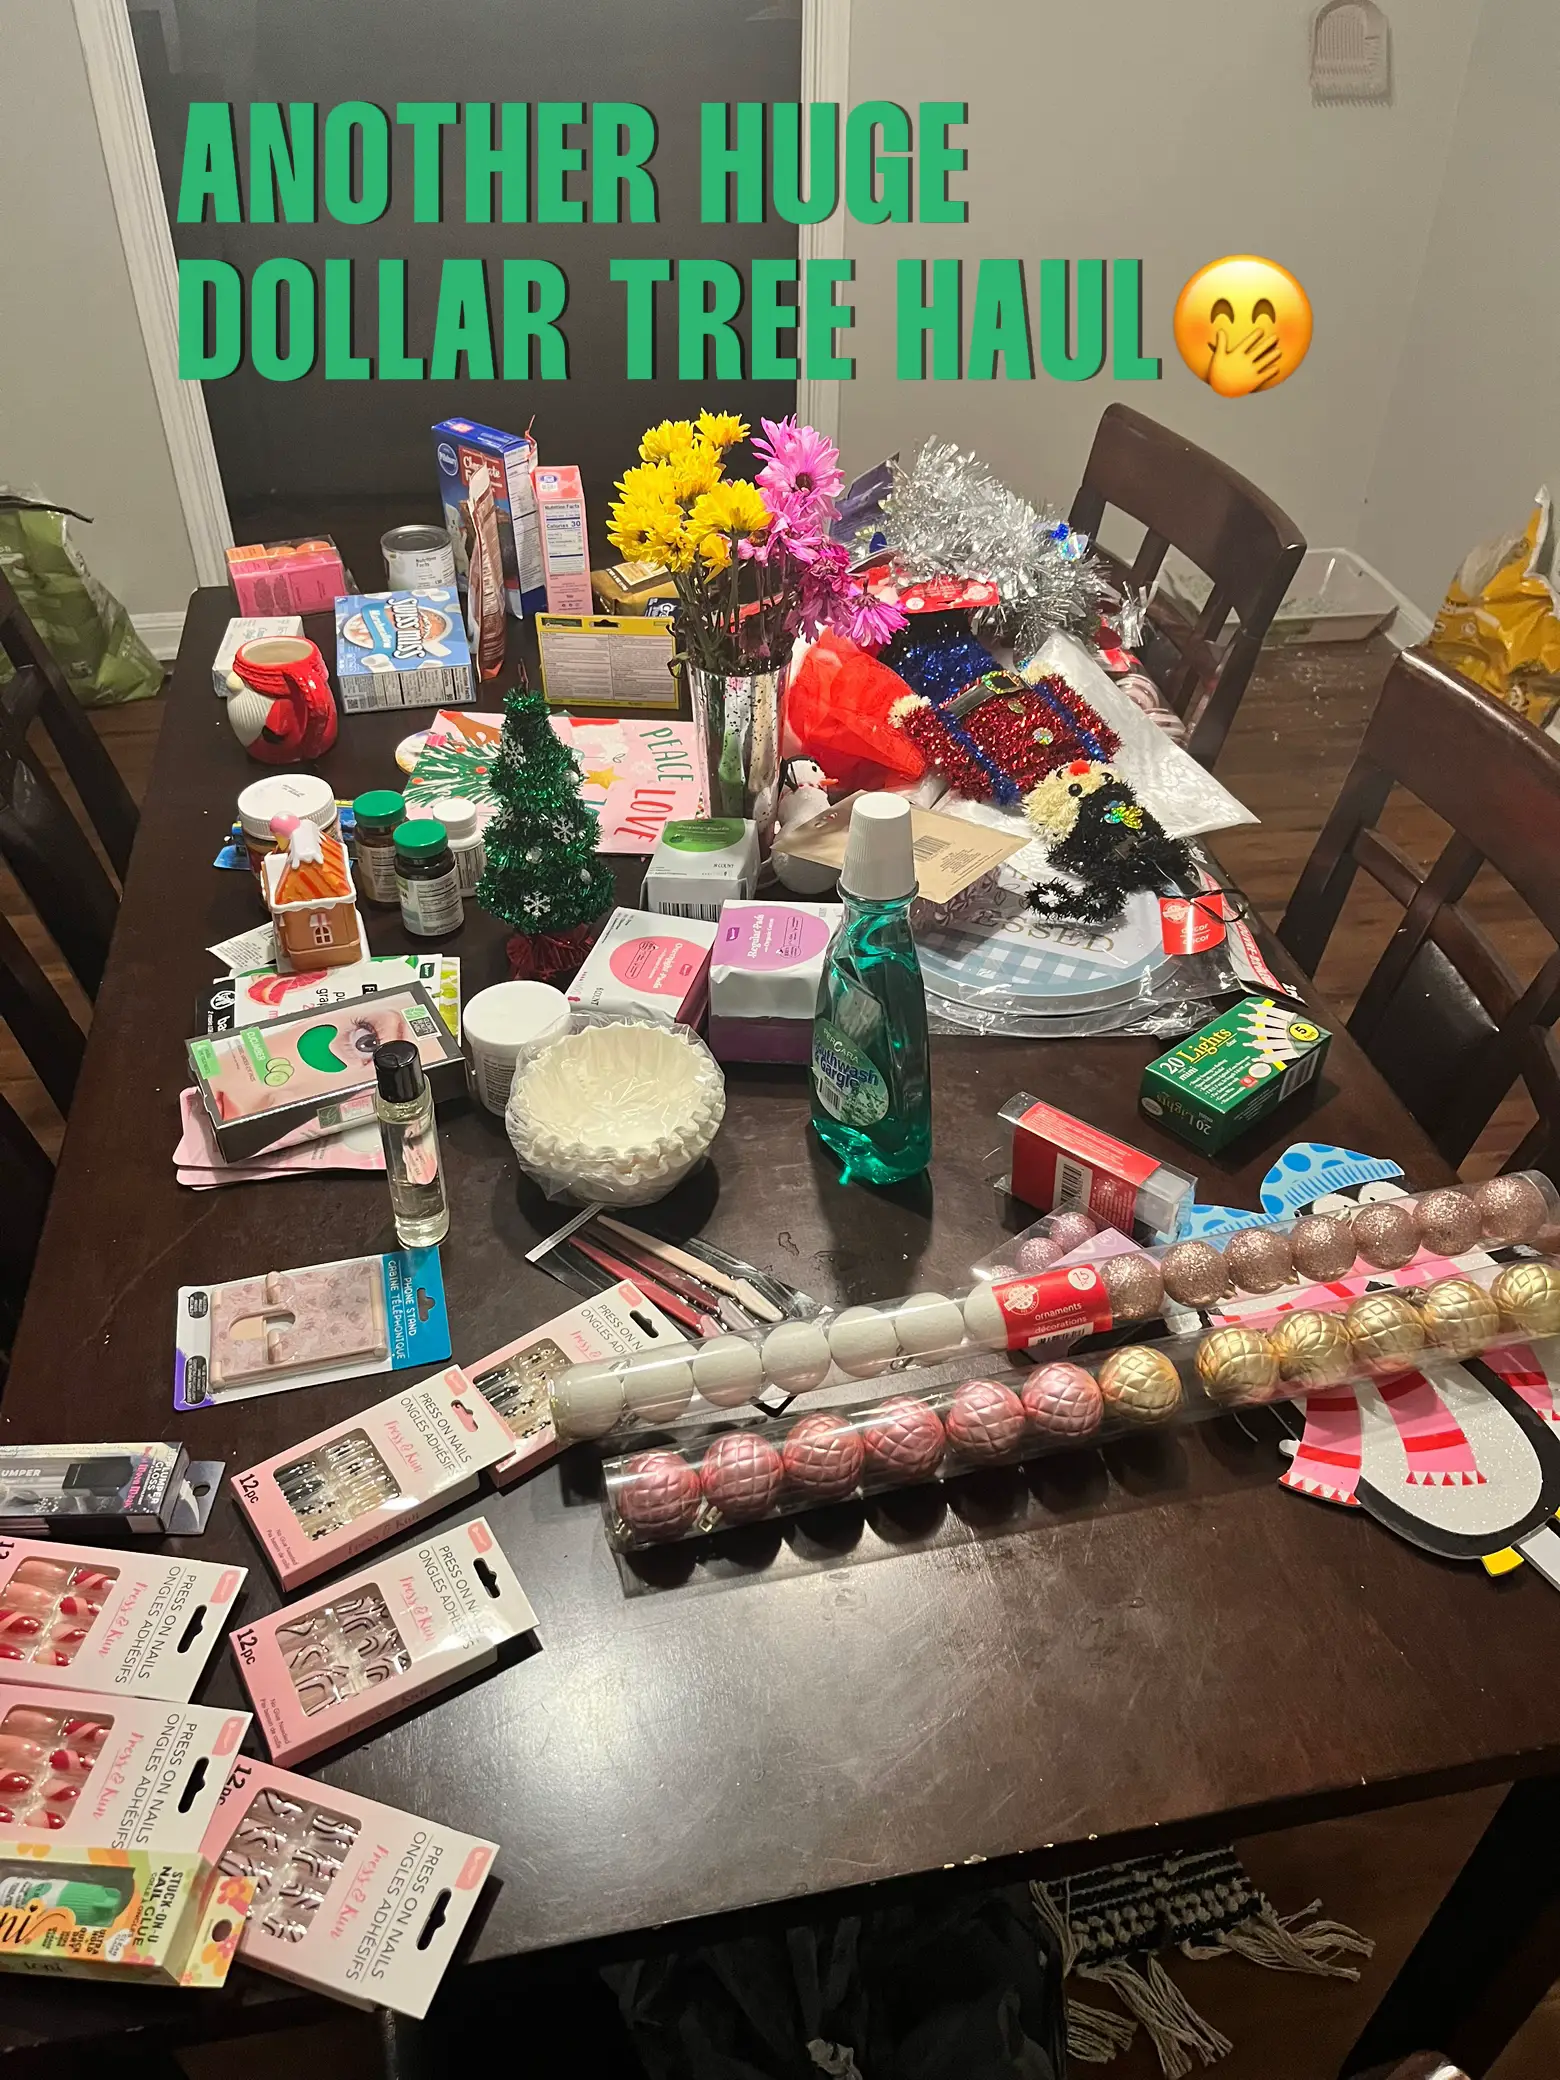 Replying to @Mommamamommymamother #dollartree #dollartreefinds #dollar, stocking ideas for men